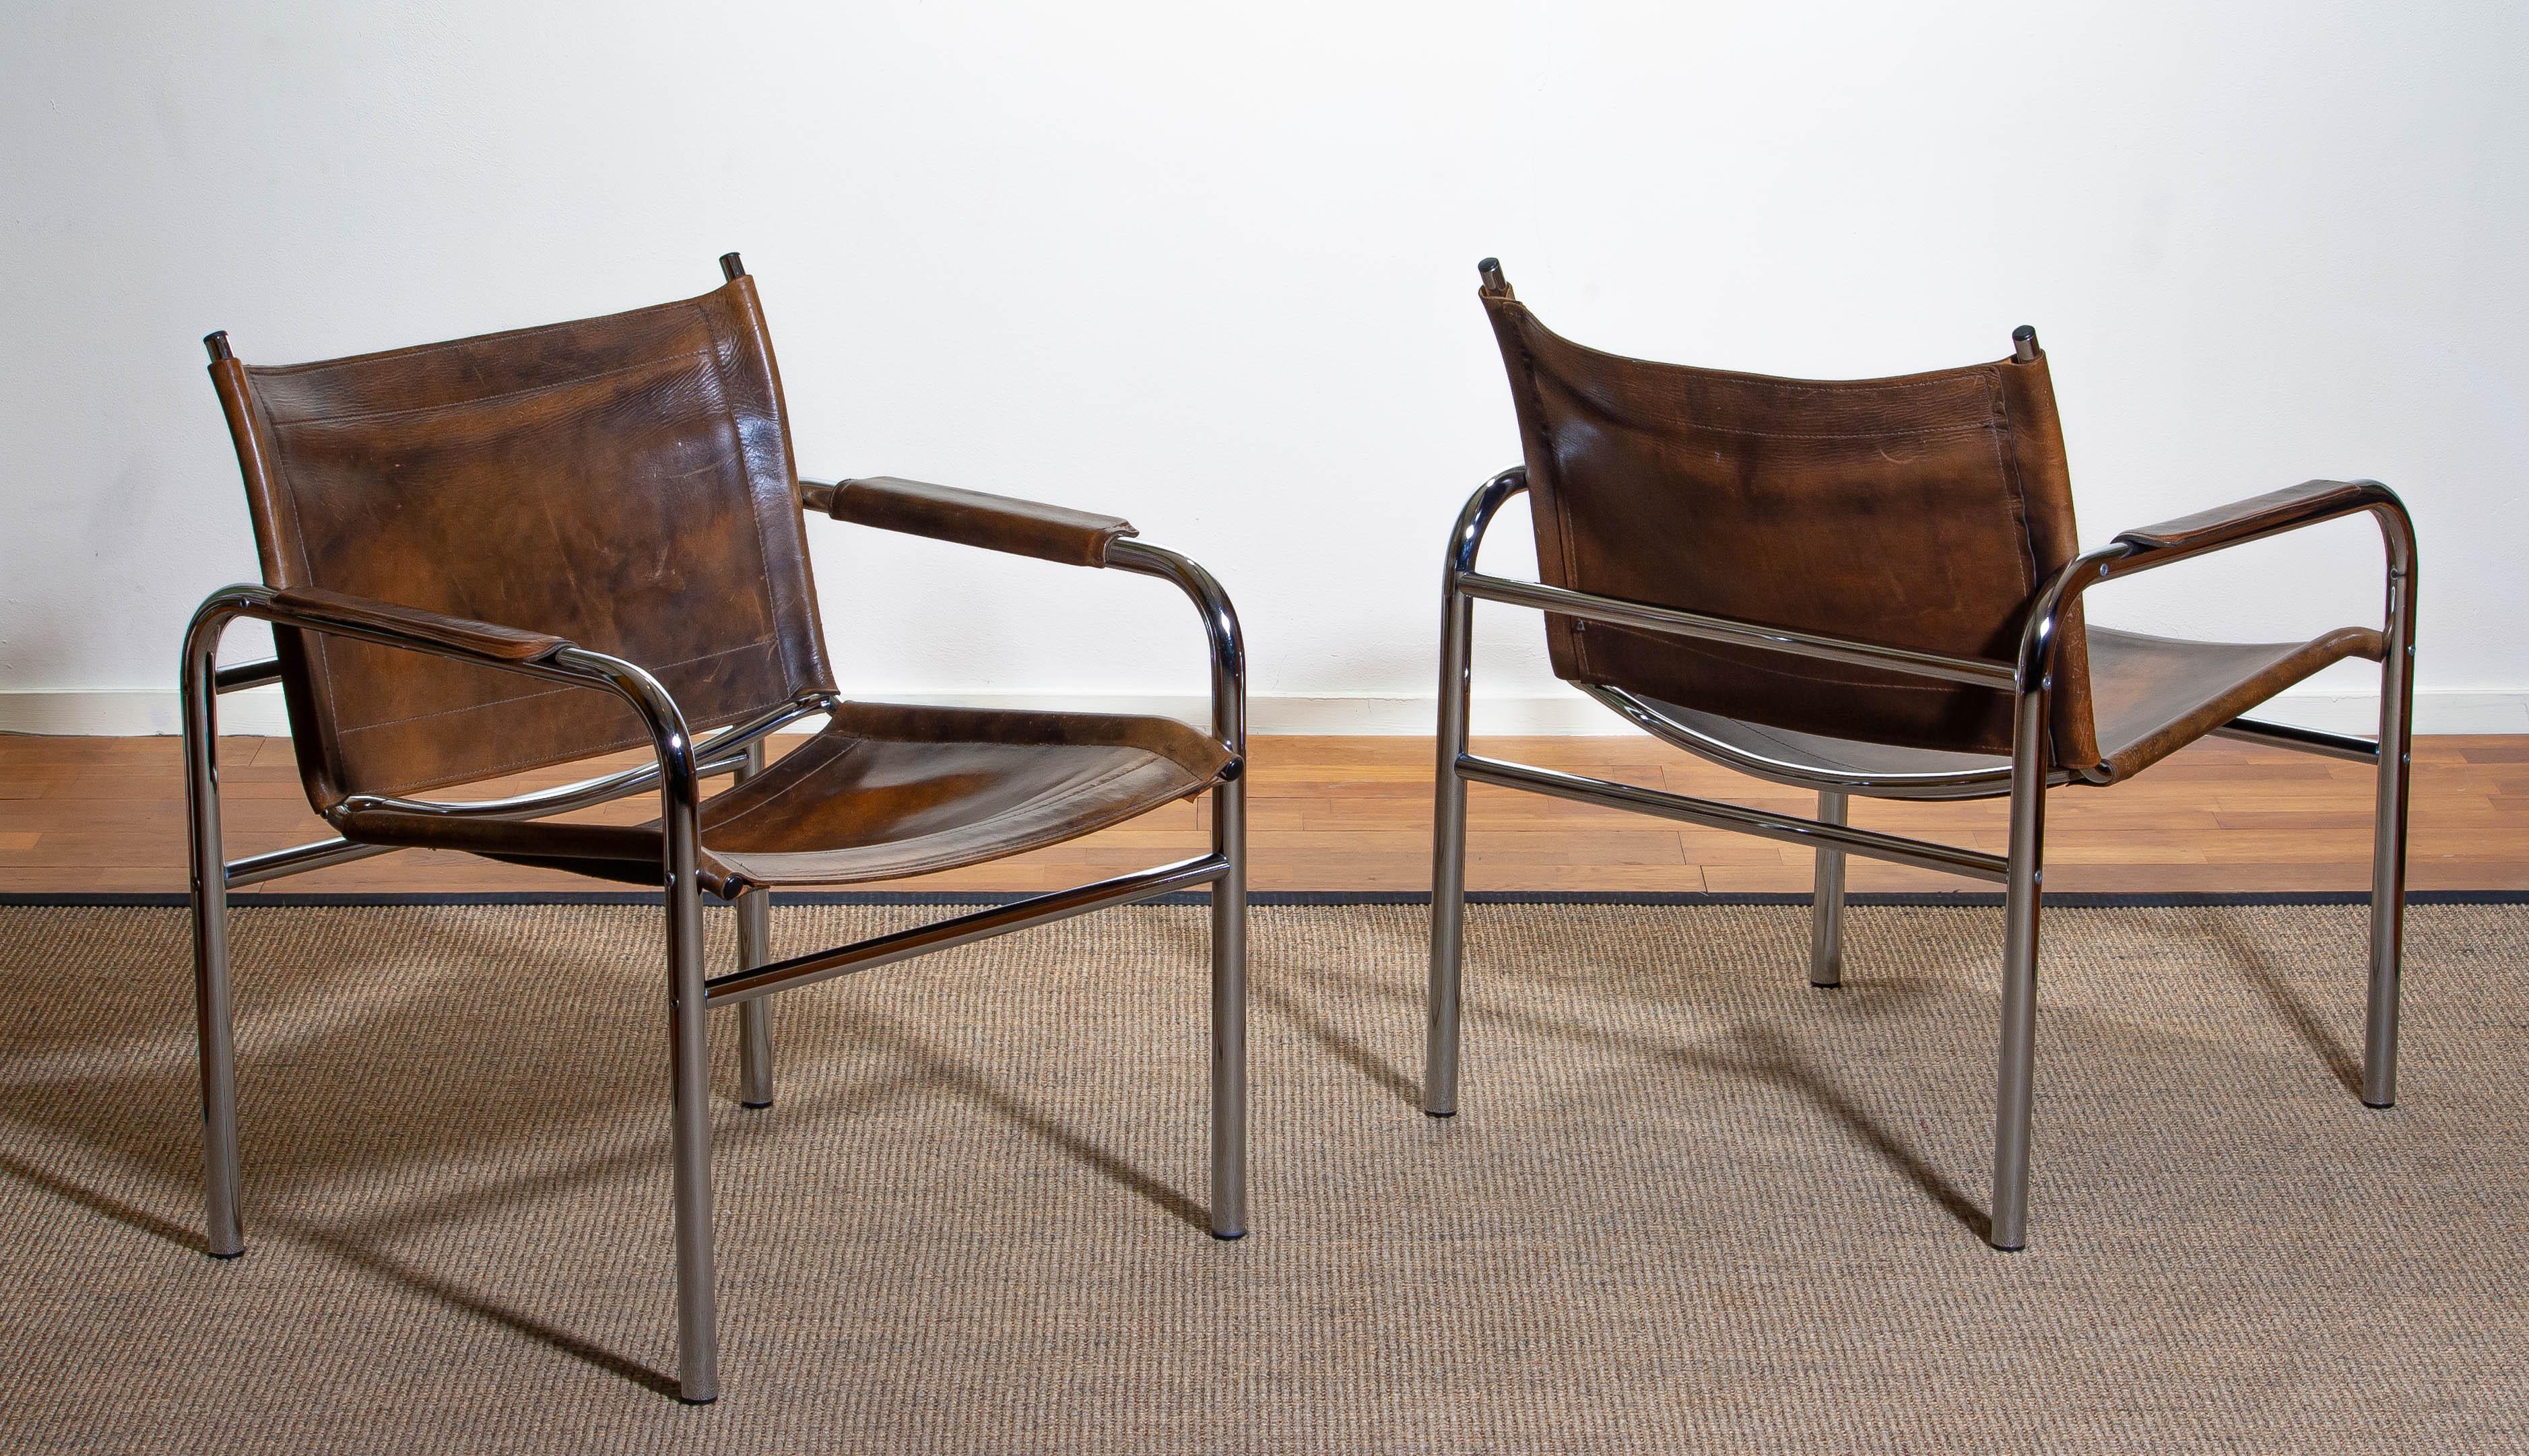 Beautiful pair of armchairs, model Klinte, designed by Tord Bjorklund, Sweden. The chairs having a tubular chromed steel frame with brown-taupe leather back / seating and armrest with a beautiful patina. Period: 1980.